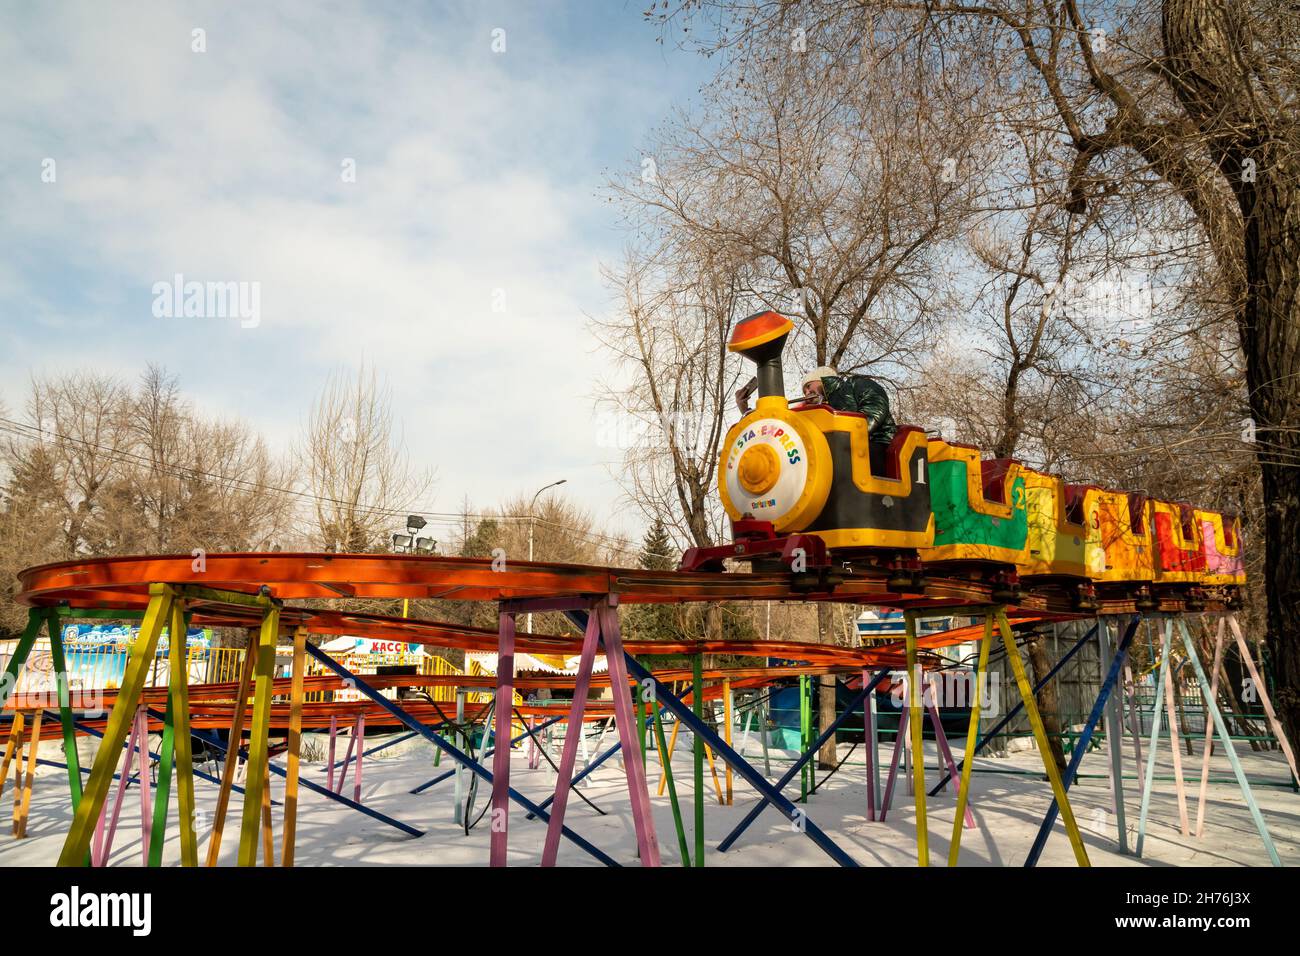 A children's train rides on high rails over snowdrifts among trees in a city amusement park. Stock Photo